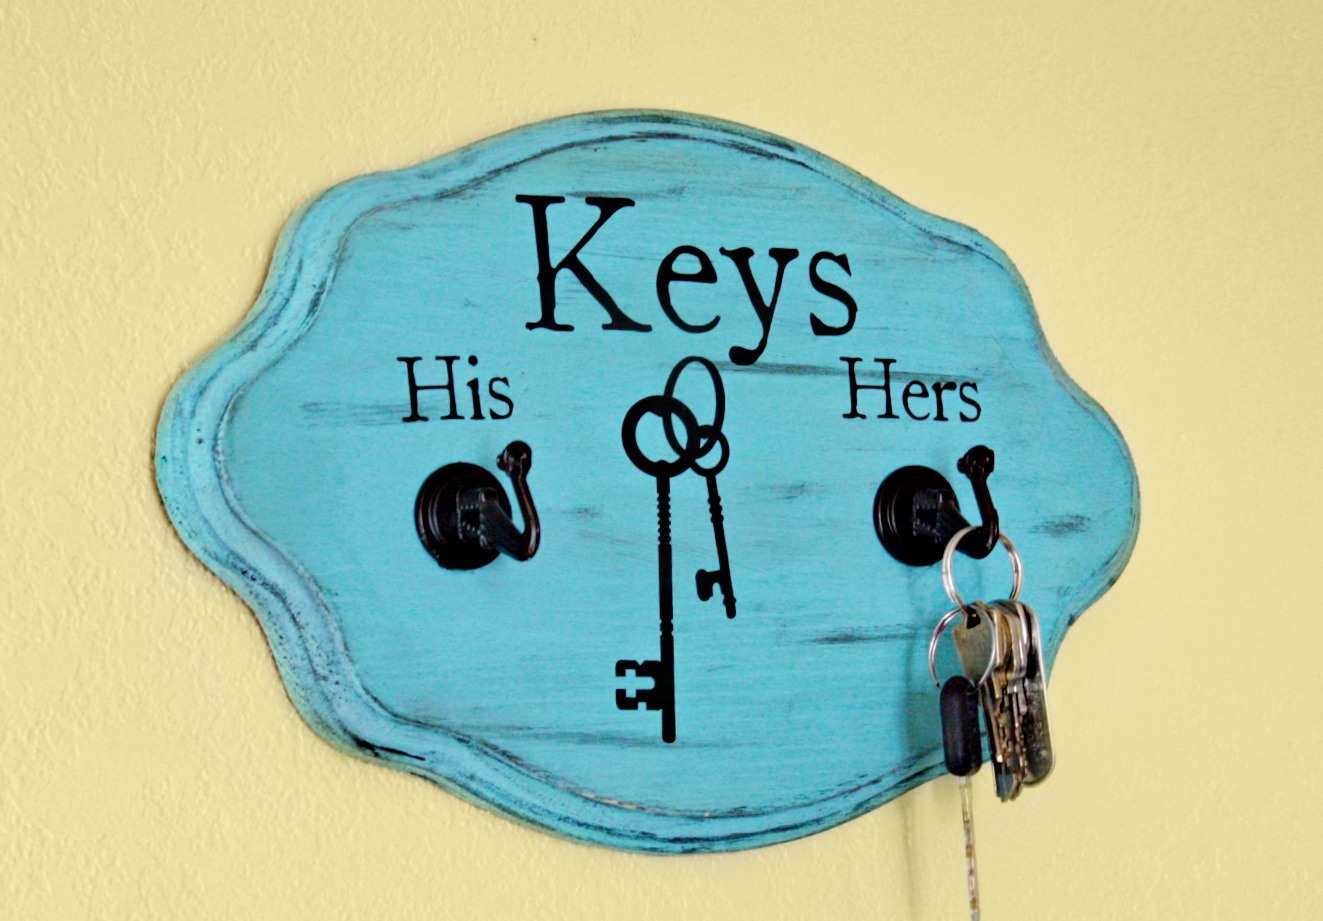 This are my keys